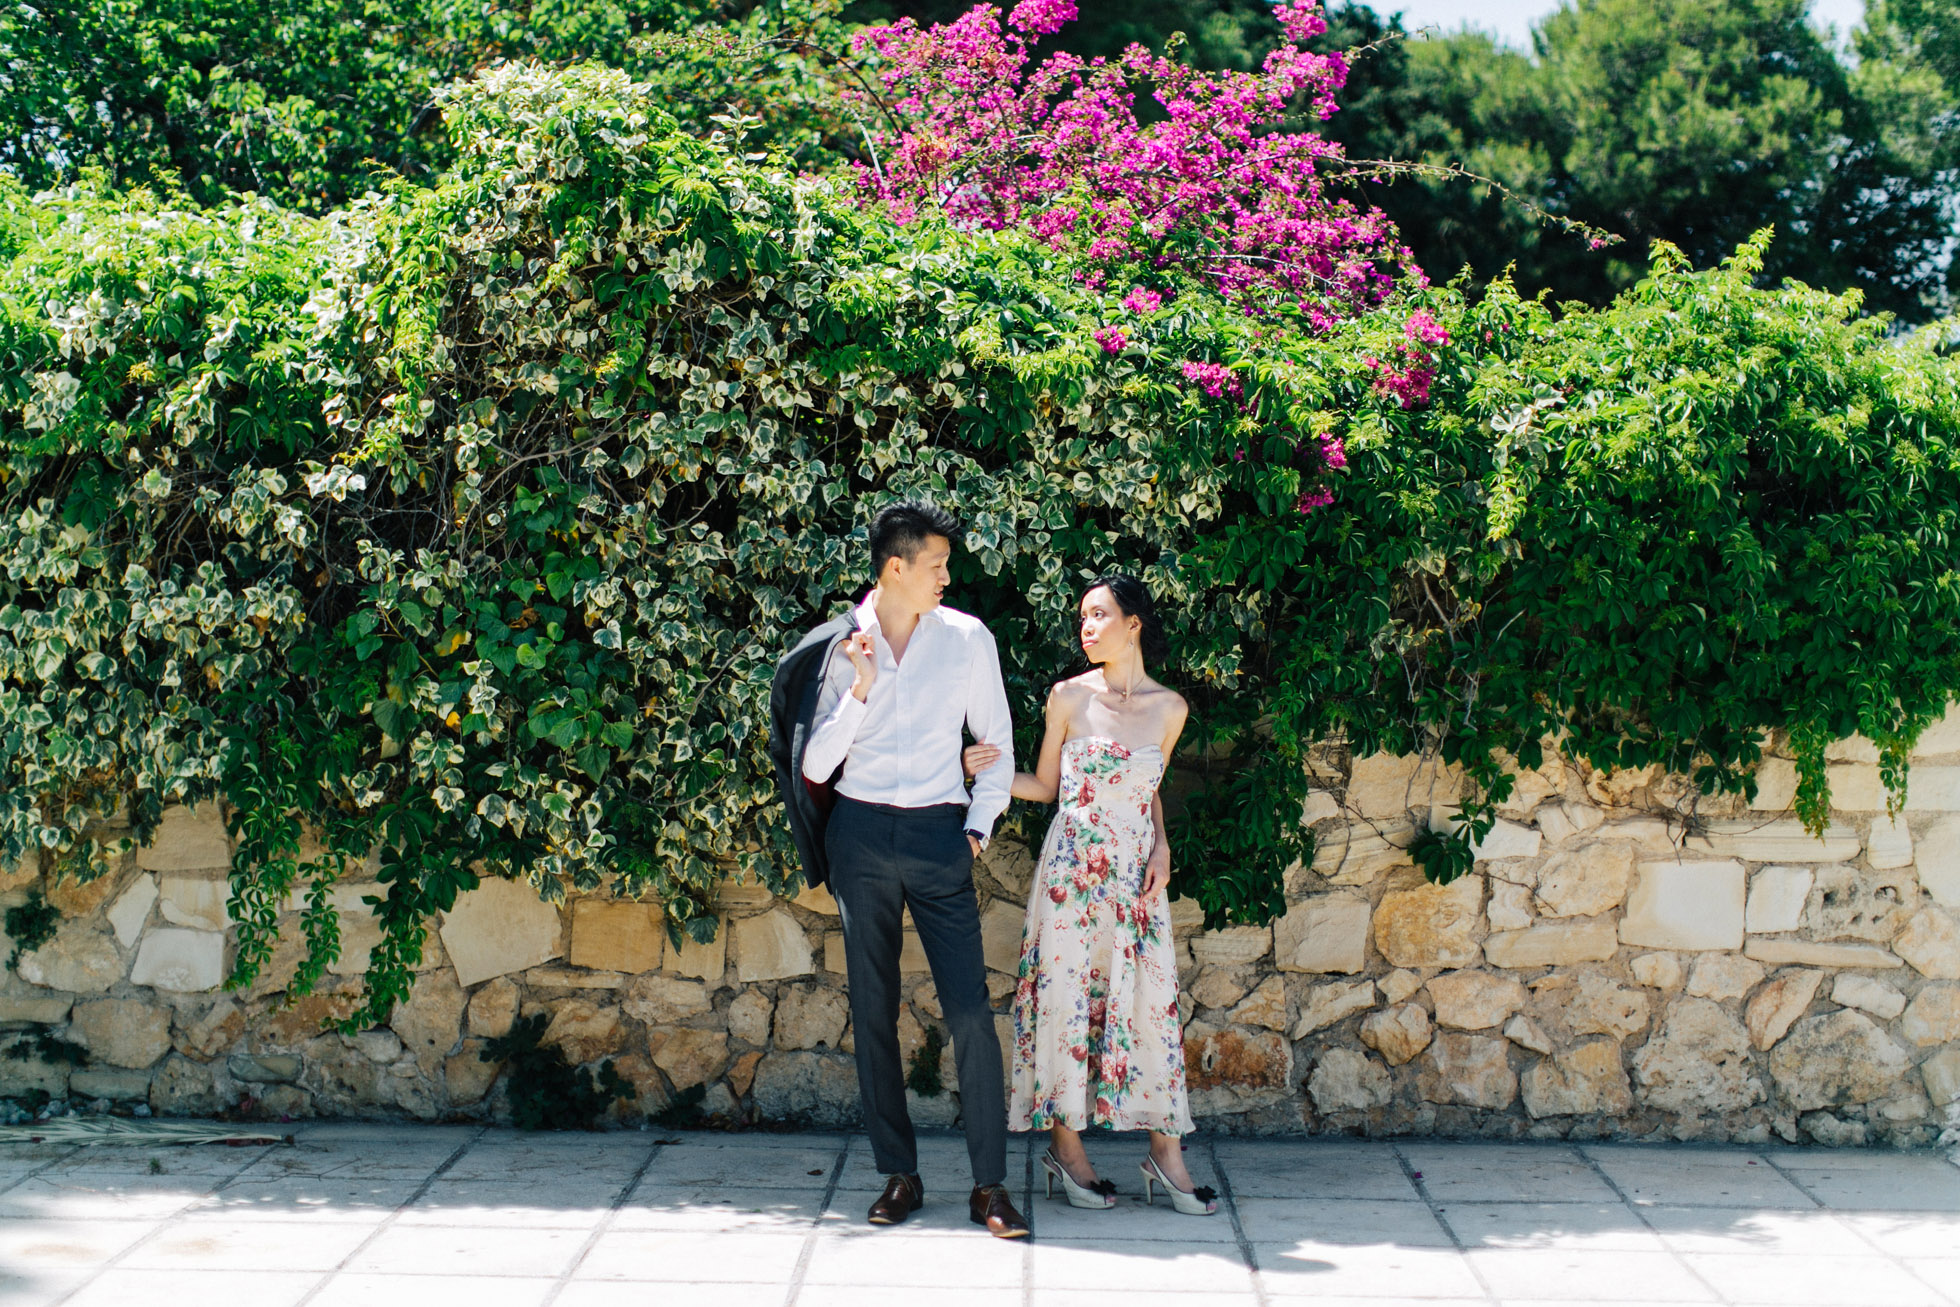 Young elegant couple wearing summer outfits is posing for their elopemement portraits for professional photographer team in Crete island, Greece. Colorful garden and park backdrop adds to the happy and vibrant feel of this session.